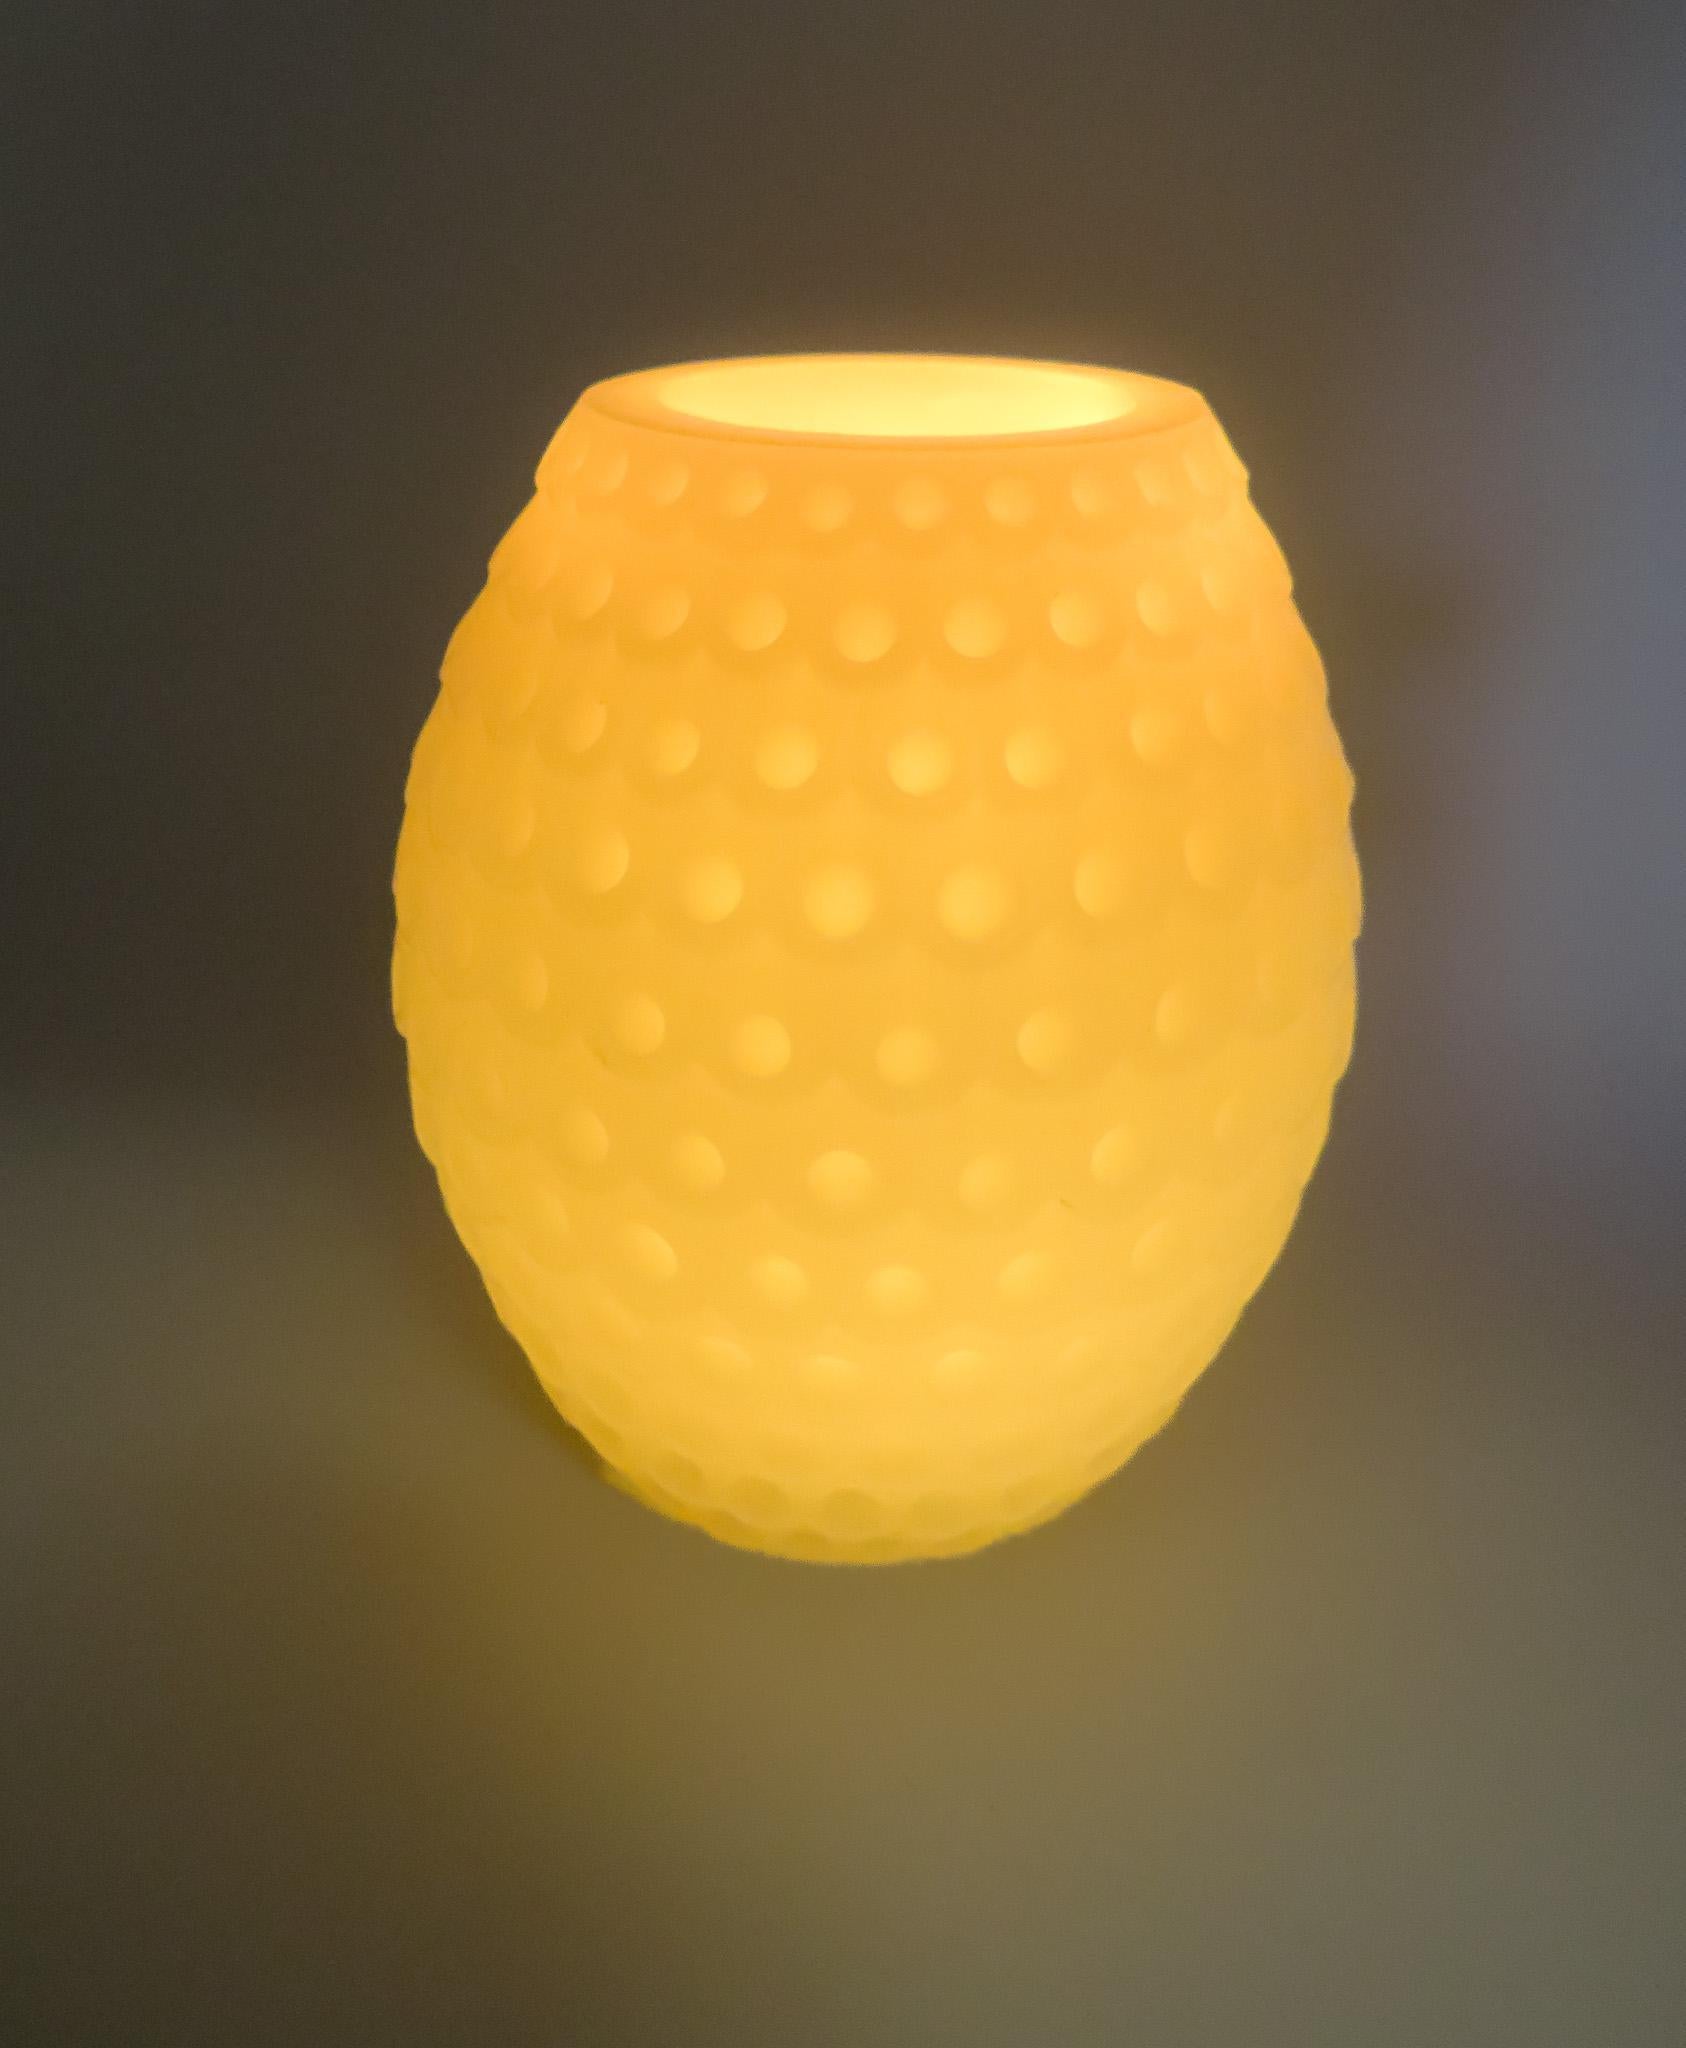 glowing and beautiful flameless candle made of wax and feature an embossed design LED Light